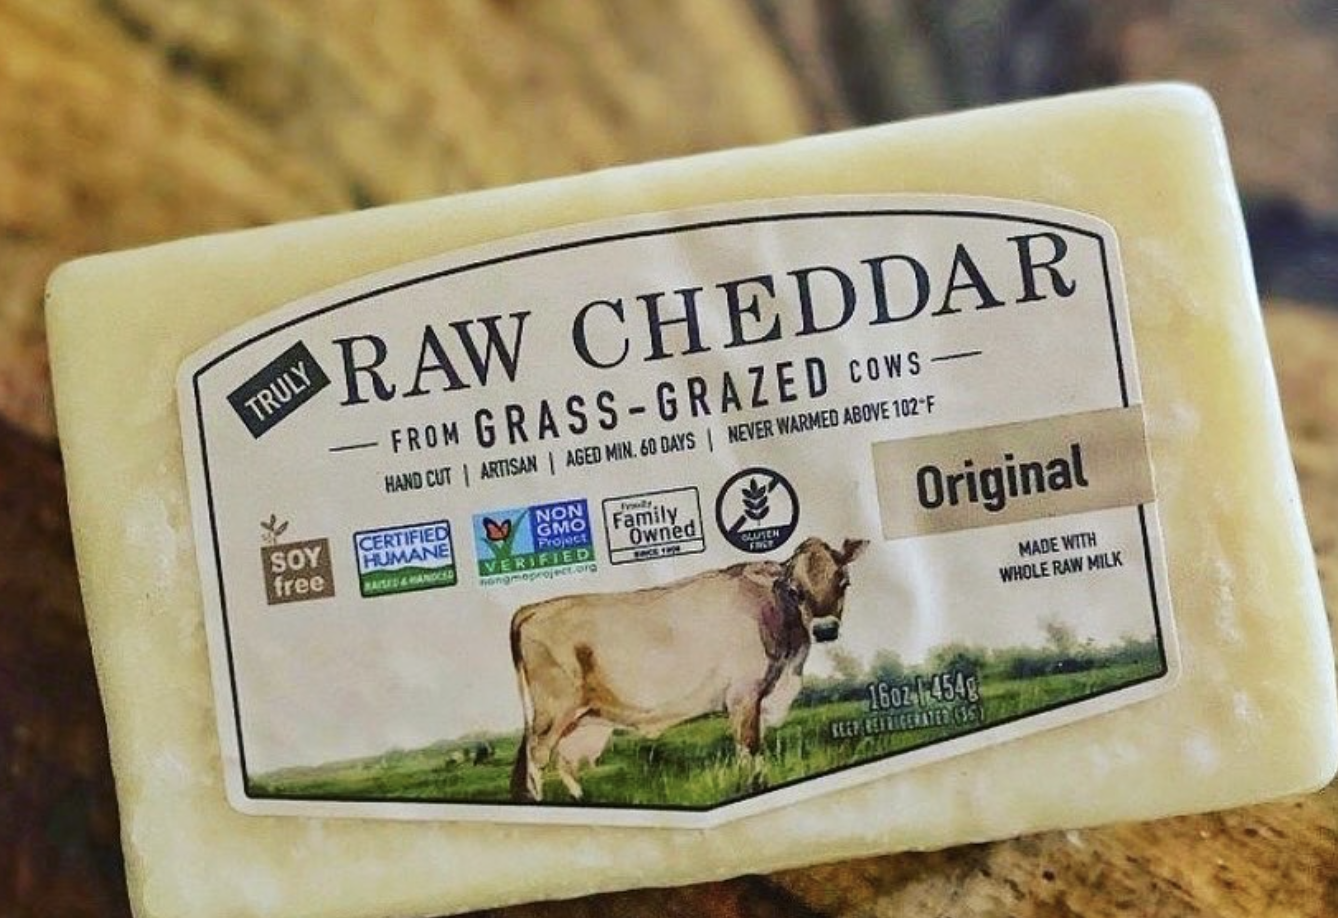 YOUR GUIDE TO RAW CHEDDAR CHEESE HEALTH BENEFITS — RAW FARM usa